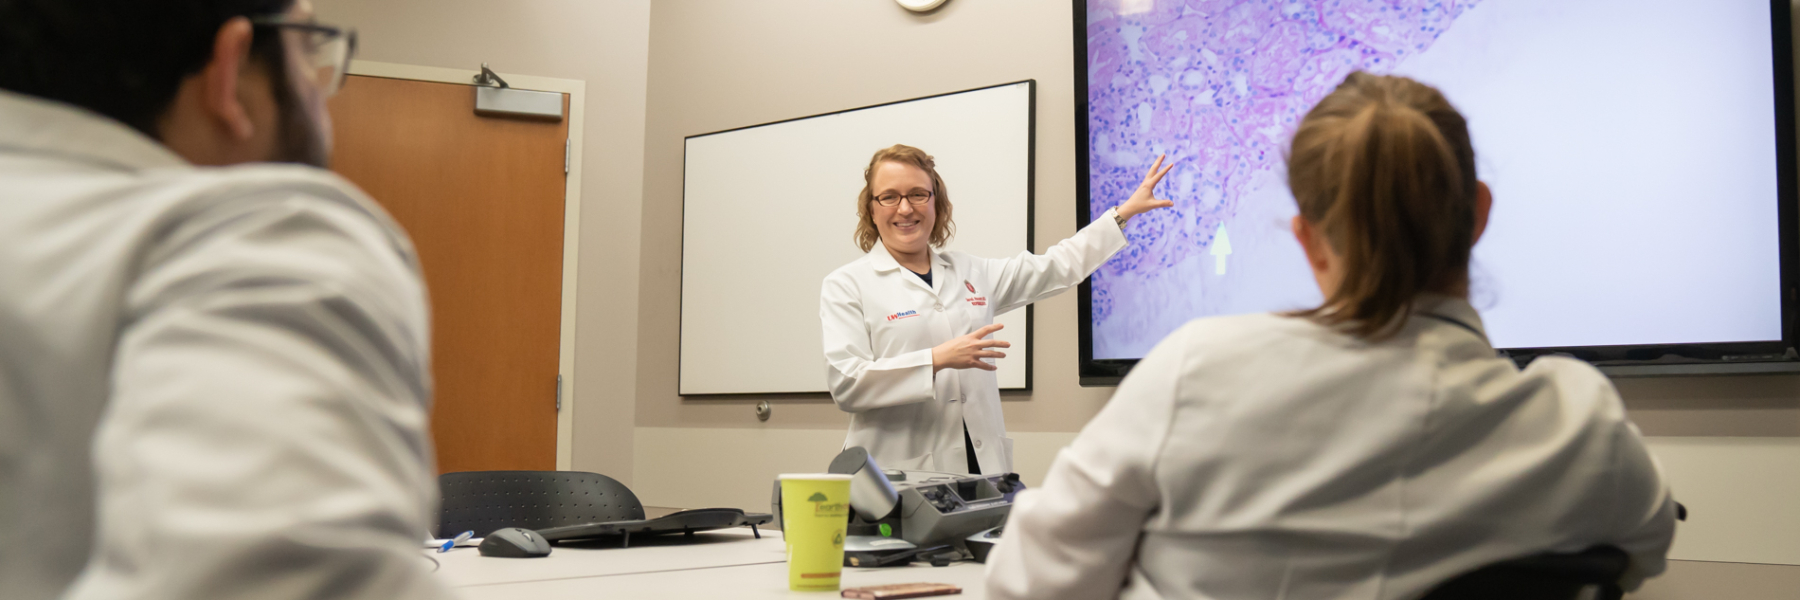 photo of Dr. Sarah Panzer pointing at a conference room screen while teaching learners 